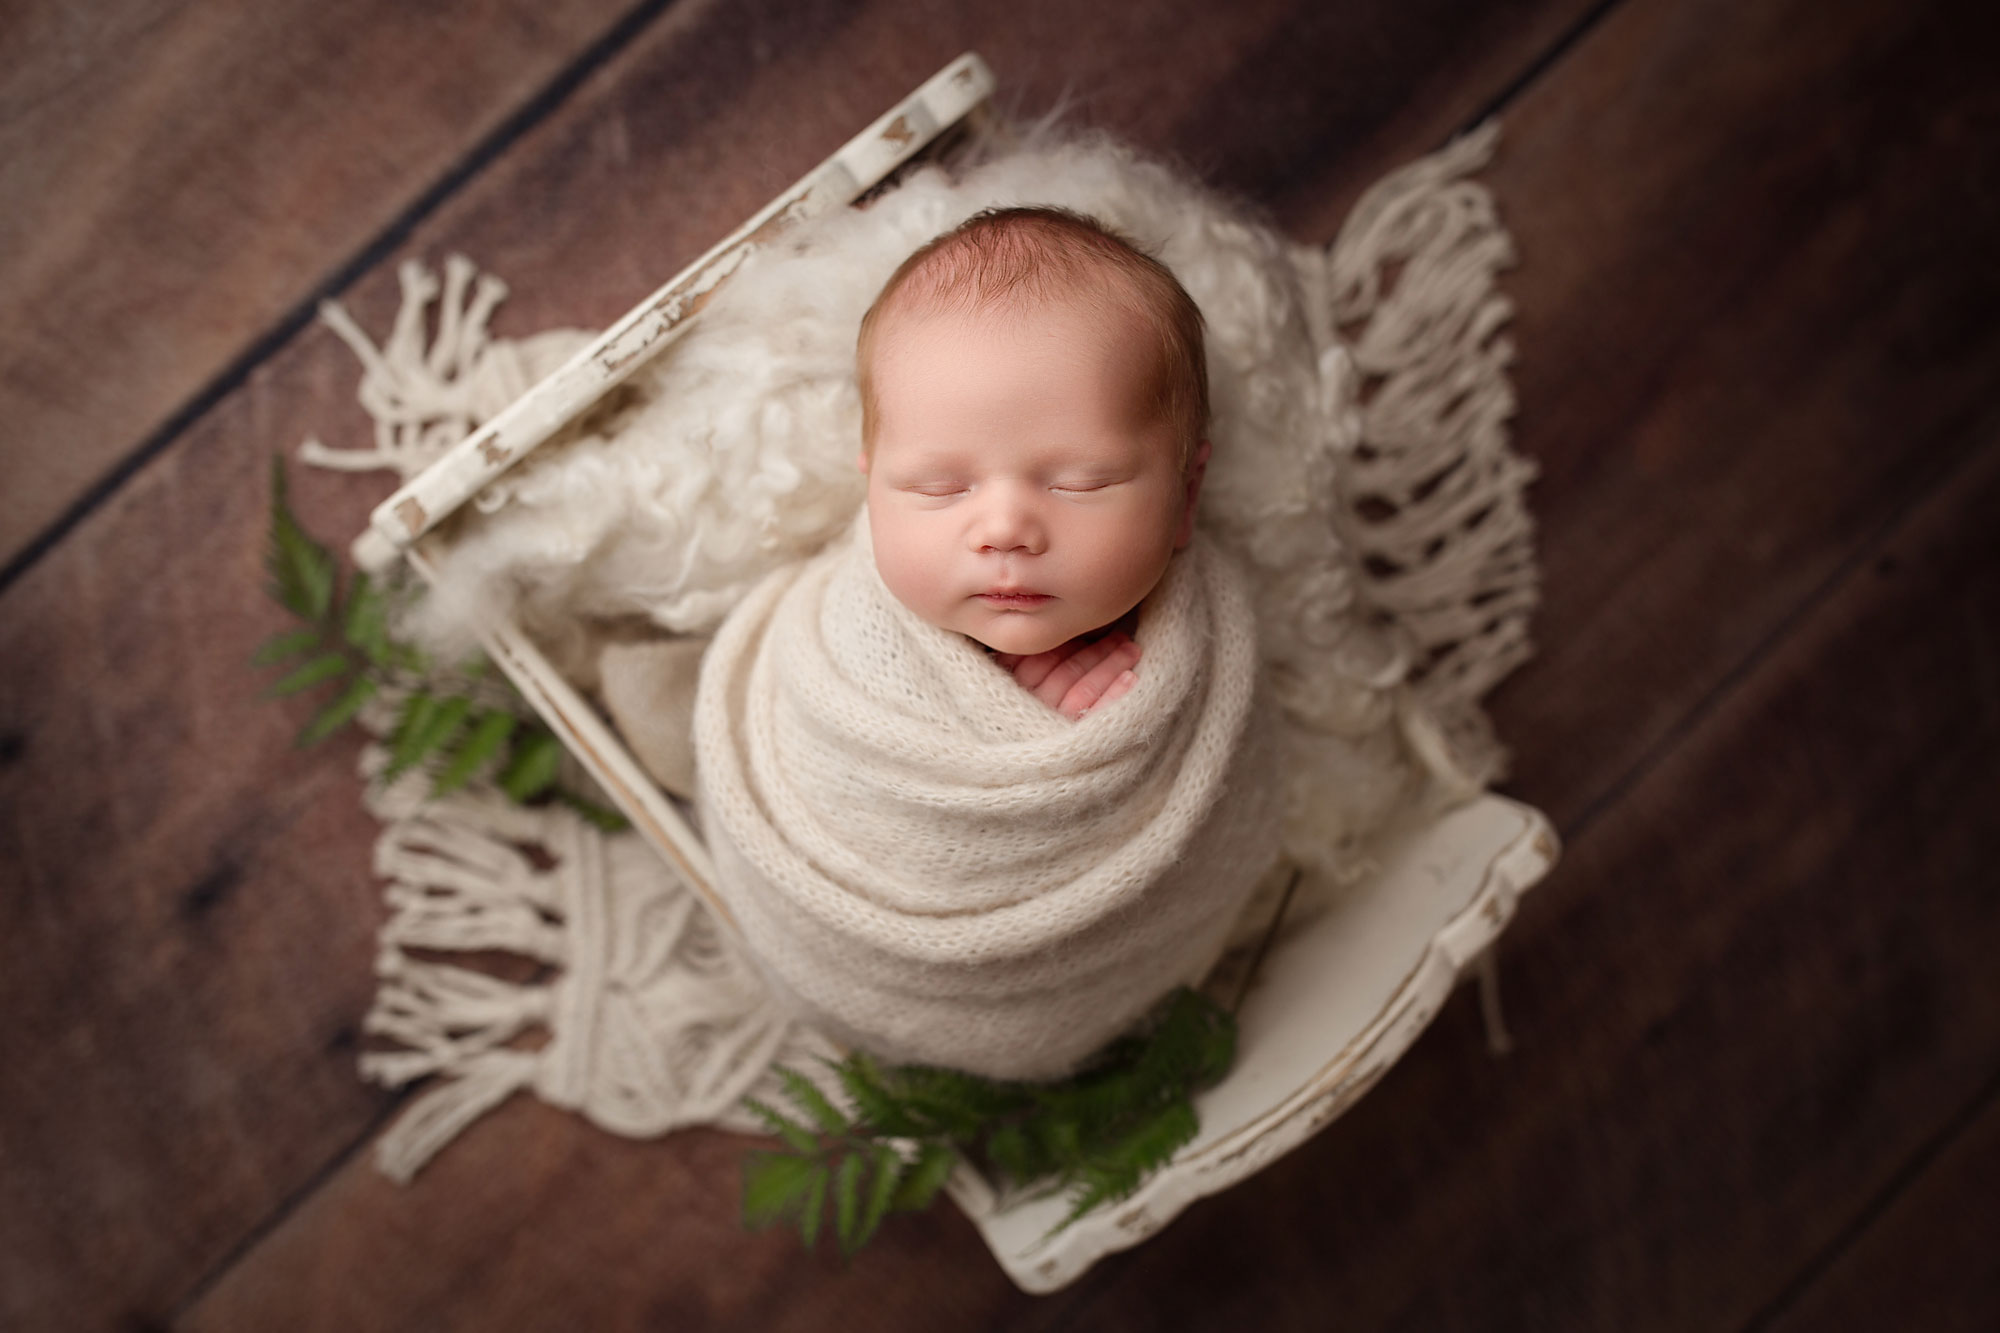 nj newborn photographer, swaddled baby asleep in tiny distressed wooden bed with blankets and greenery